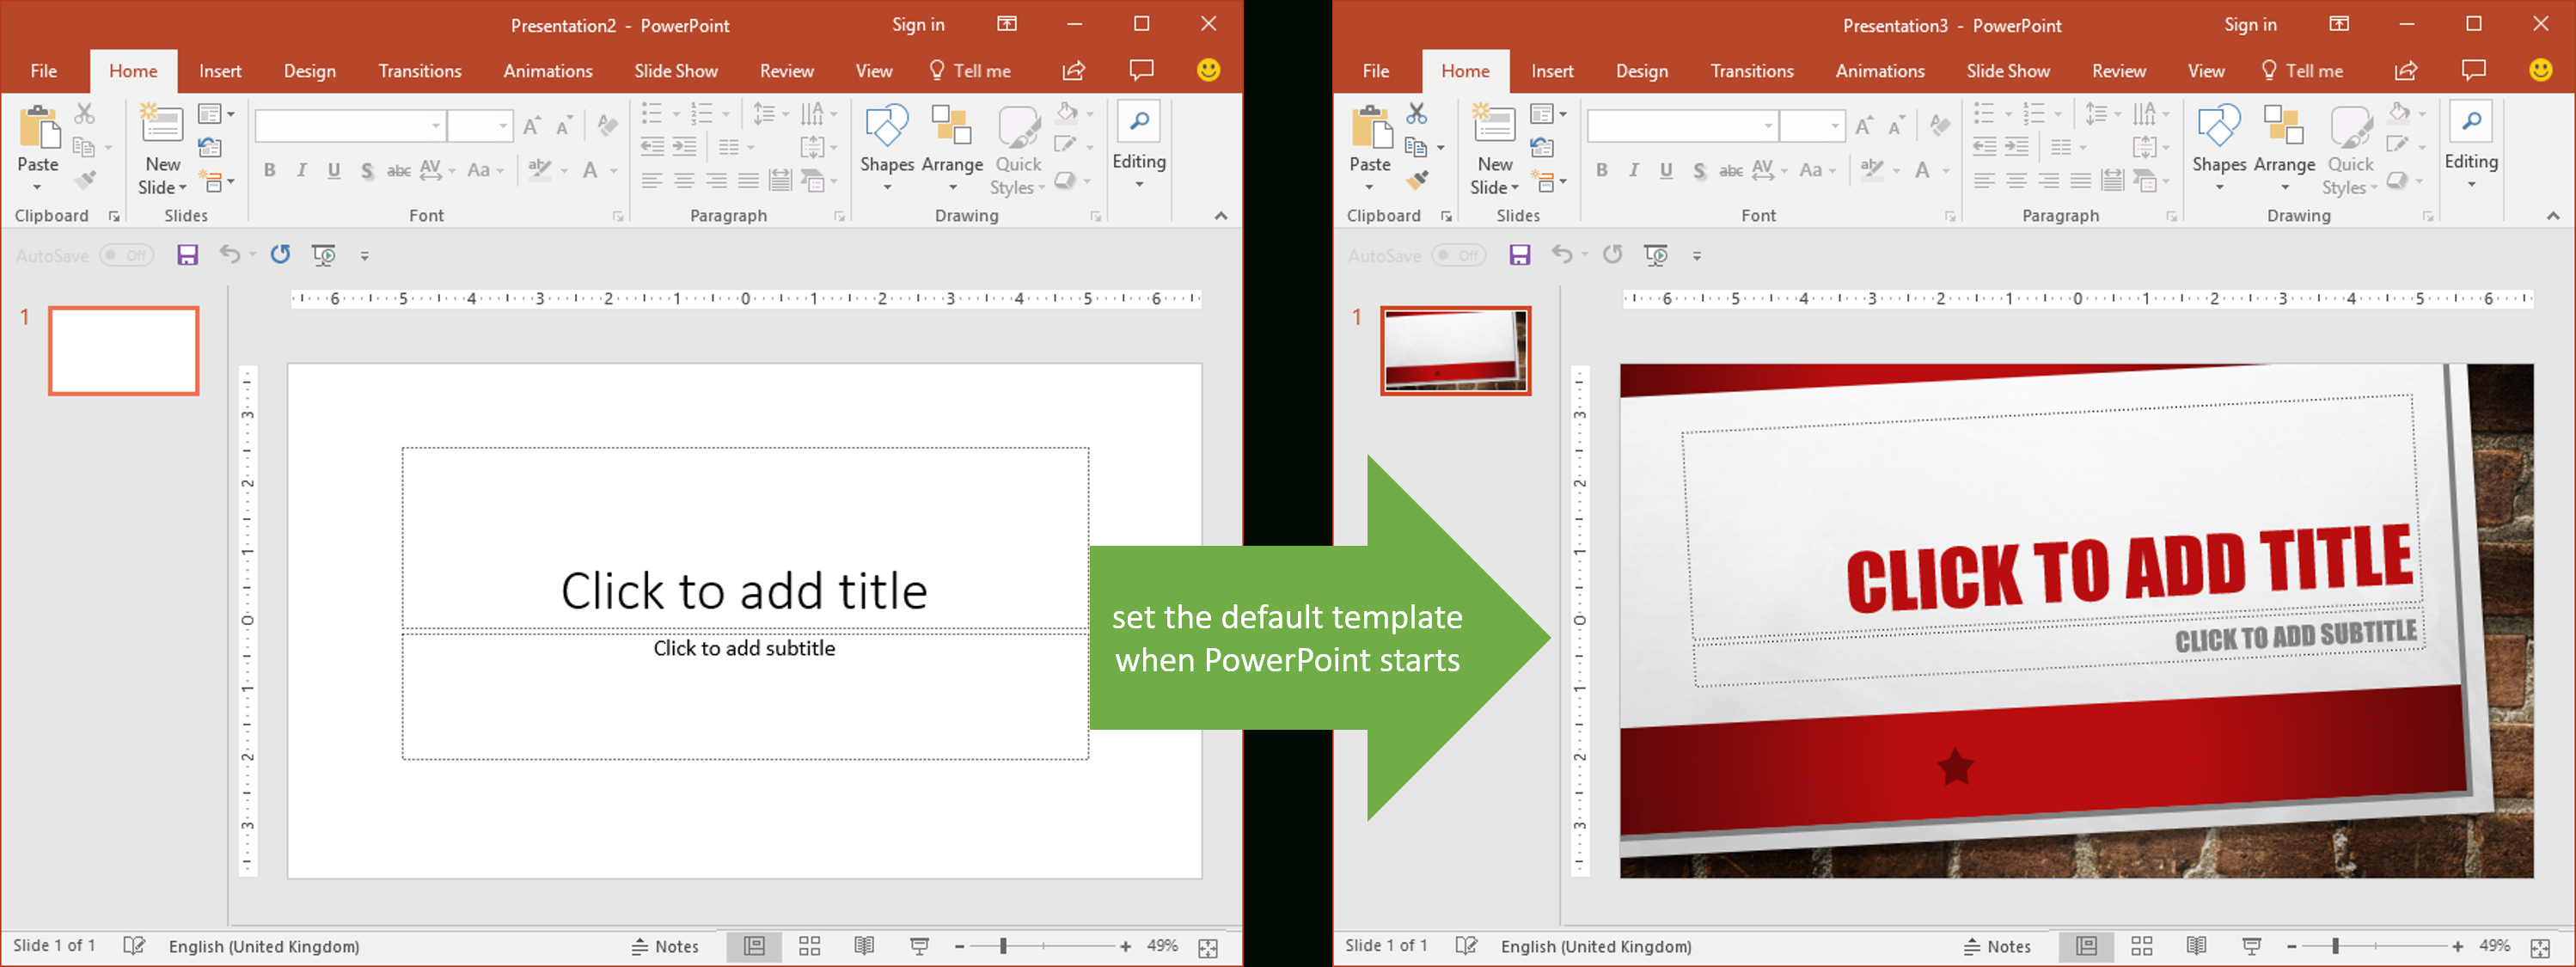 Set The Default Template When Powerpoint Starts | Youpresent Inside Where Are Powerpoint Templates Stored